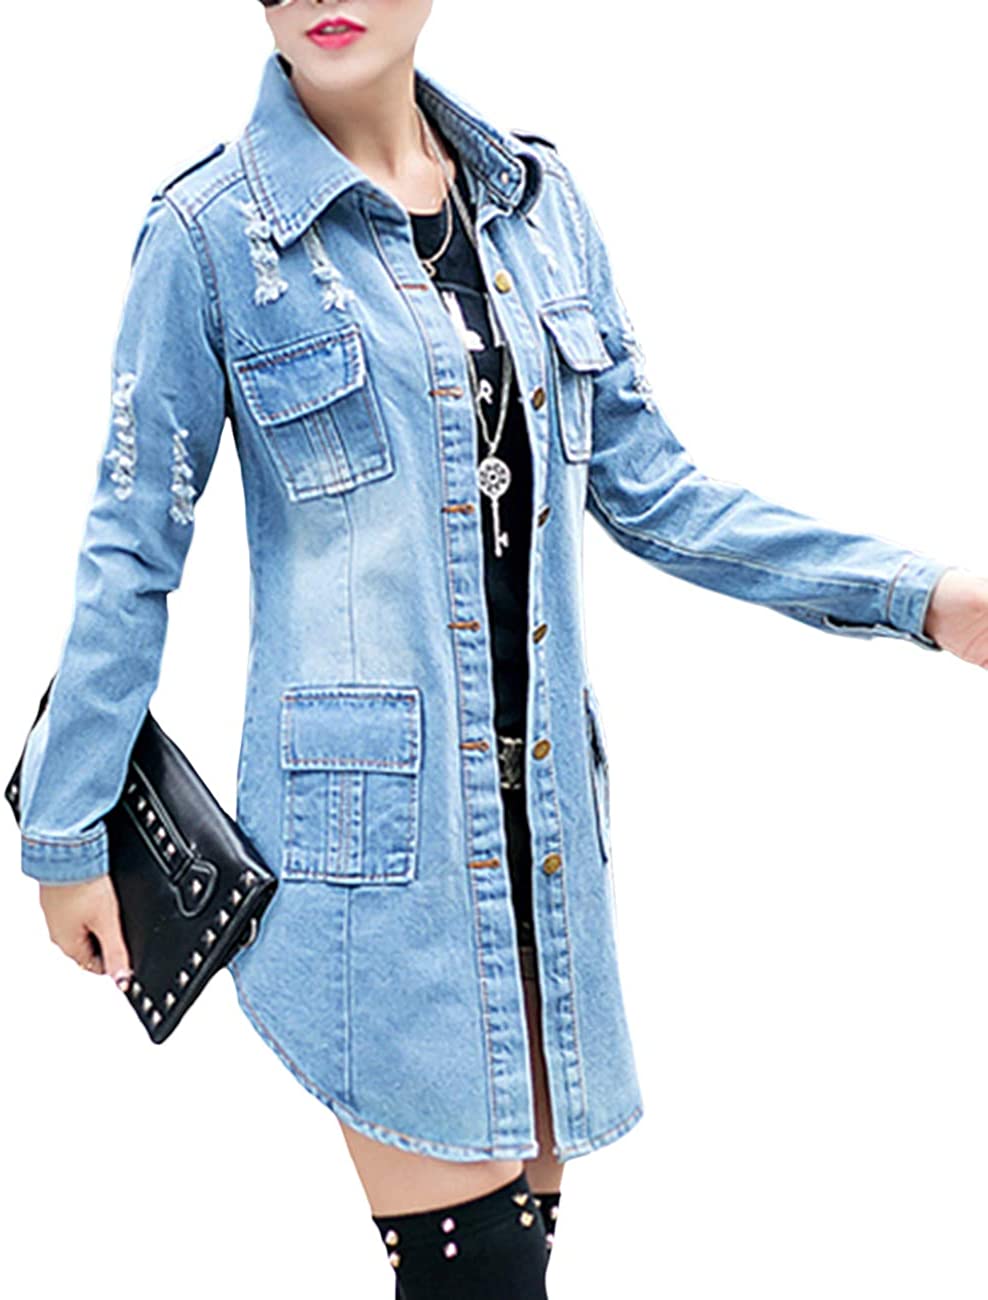 Women's Distressed Denim Jeans Outfits Coat Spring Fall Ripped Jeans Outerwear Denim Jacket